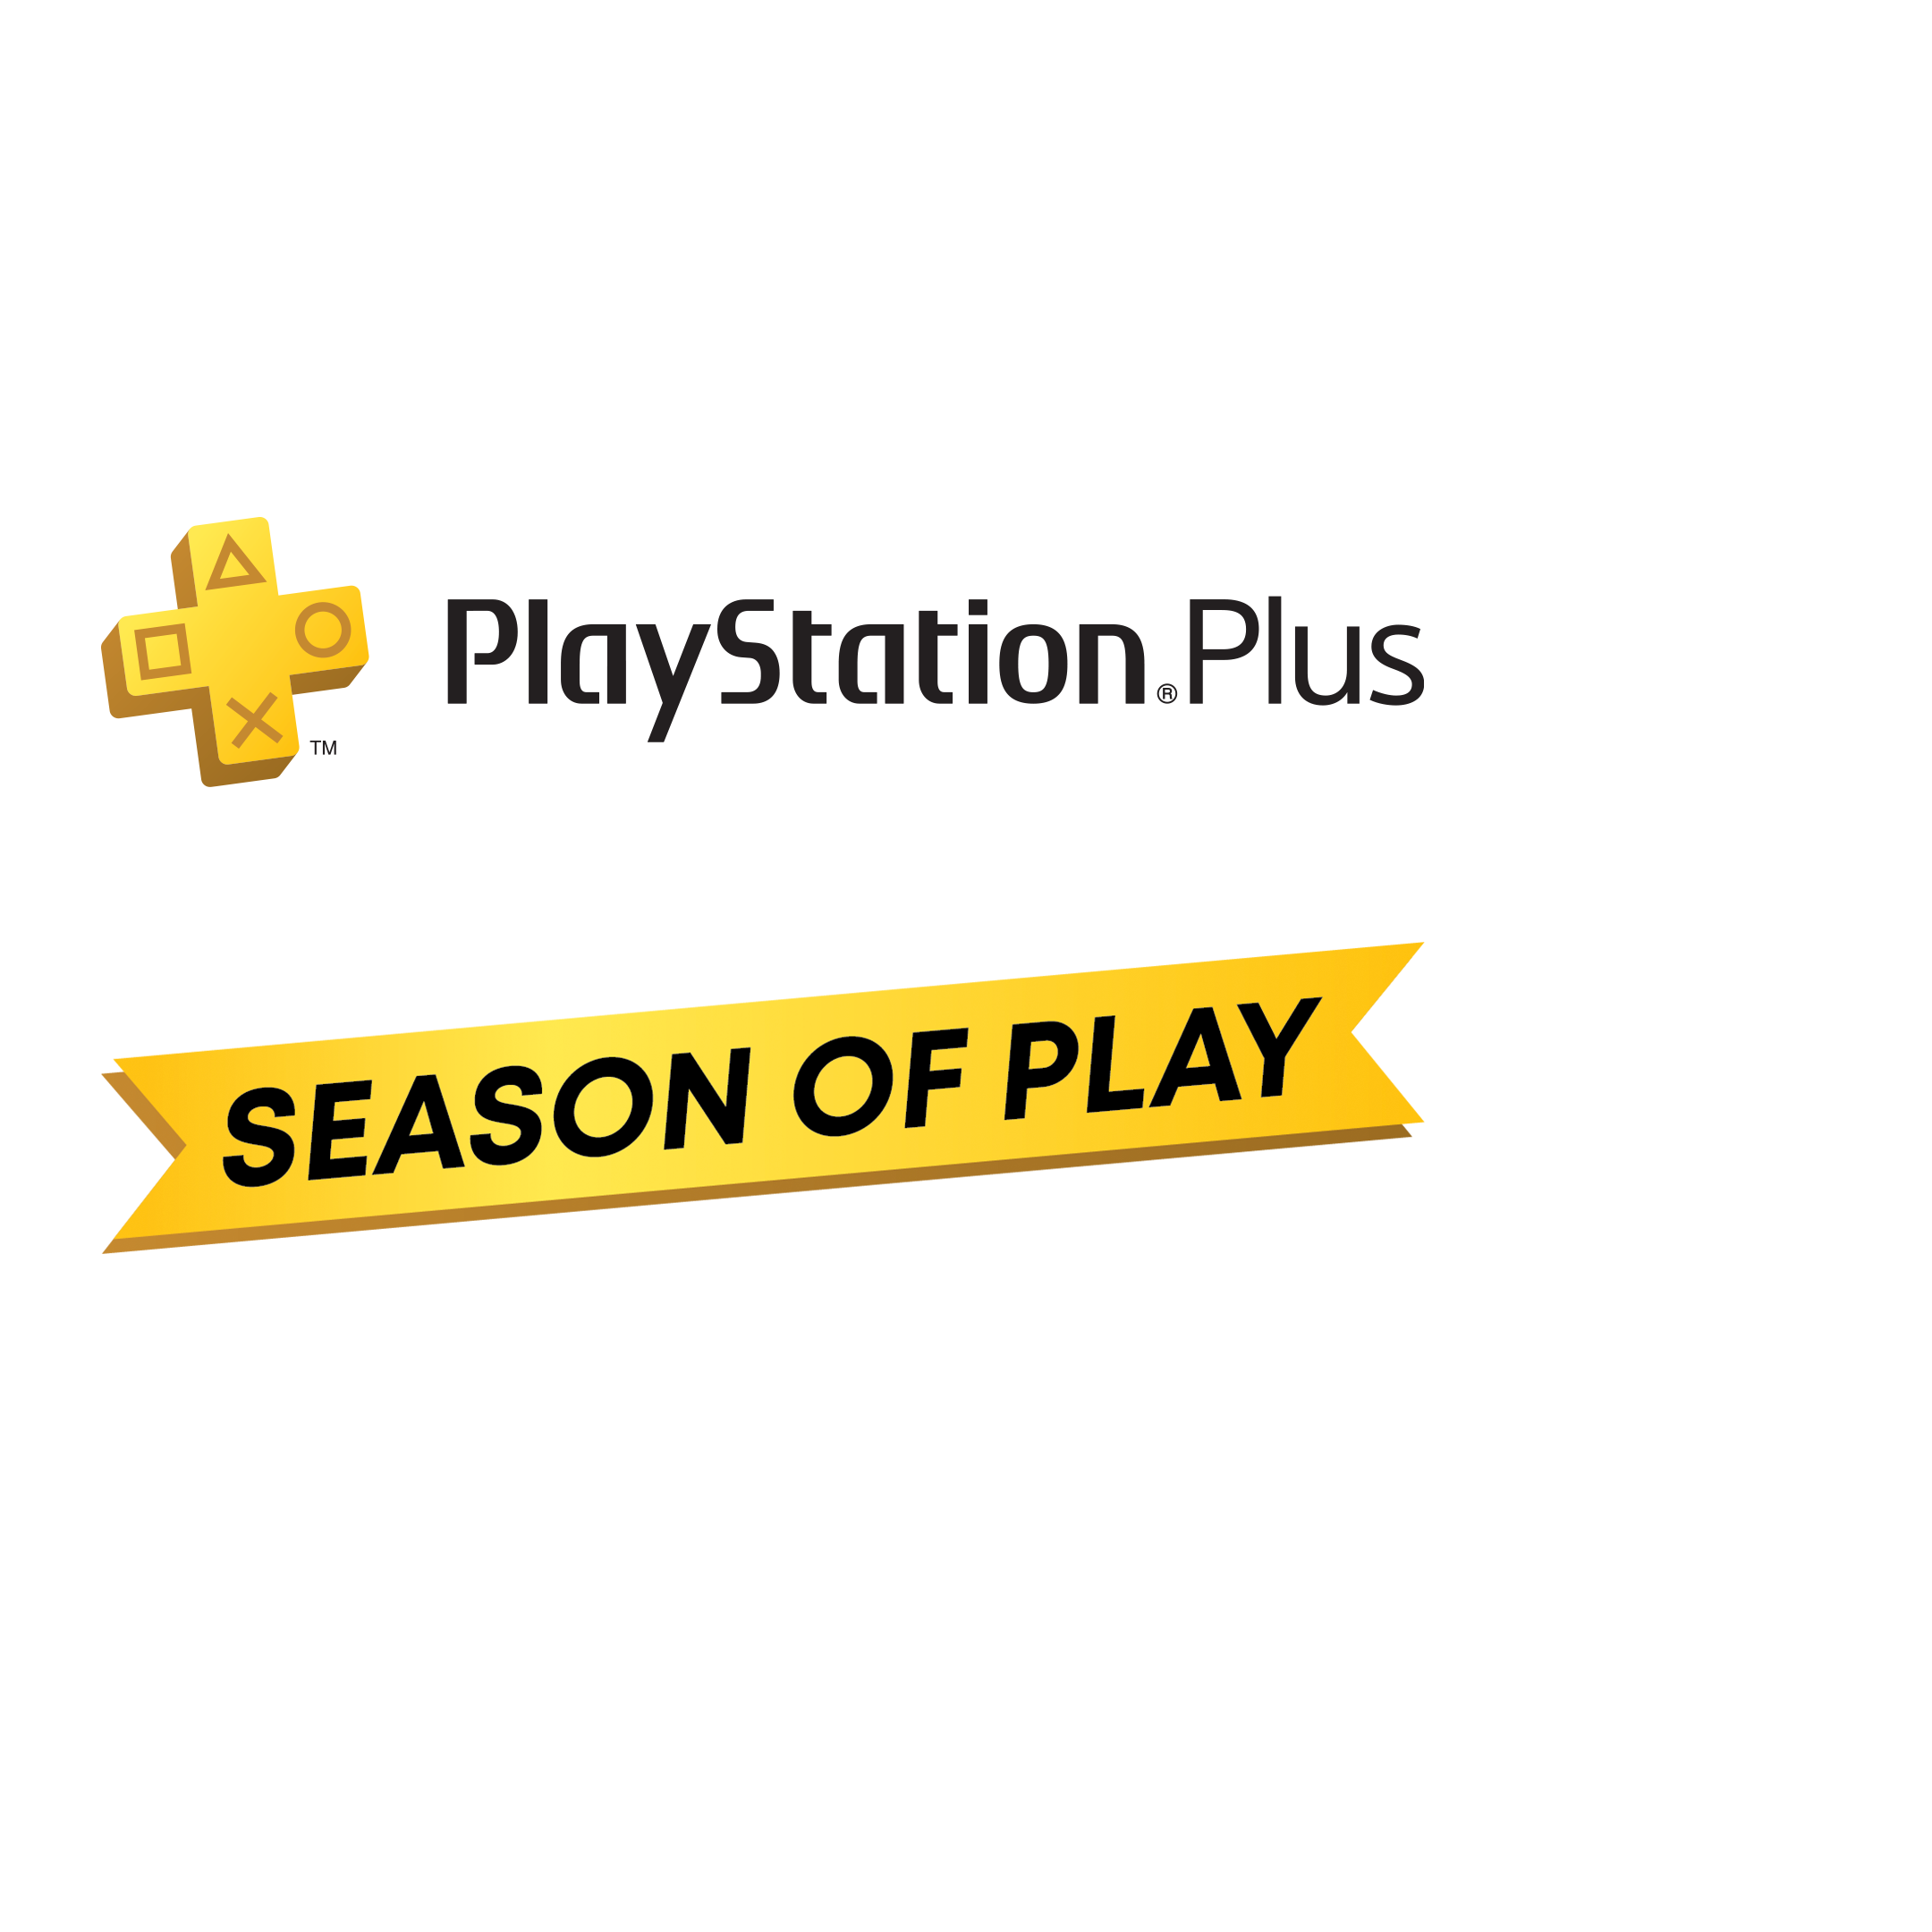 PSN Card 12 Month  Playstation Plus Singapore digital for